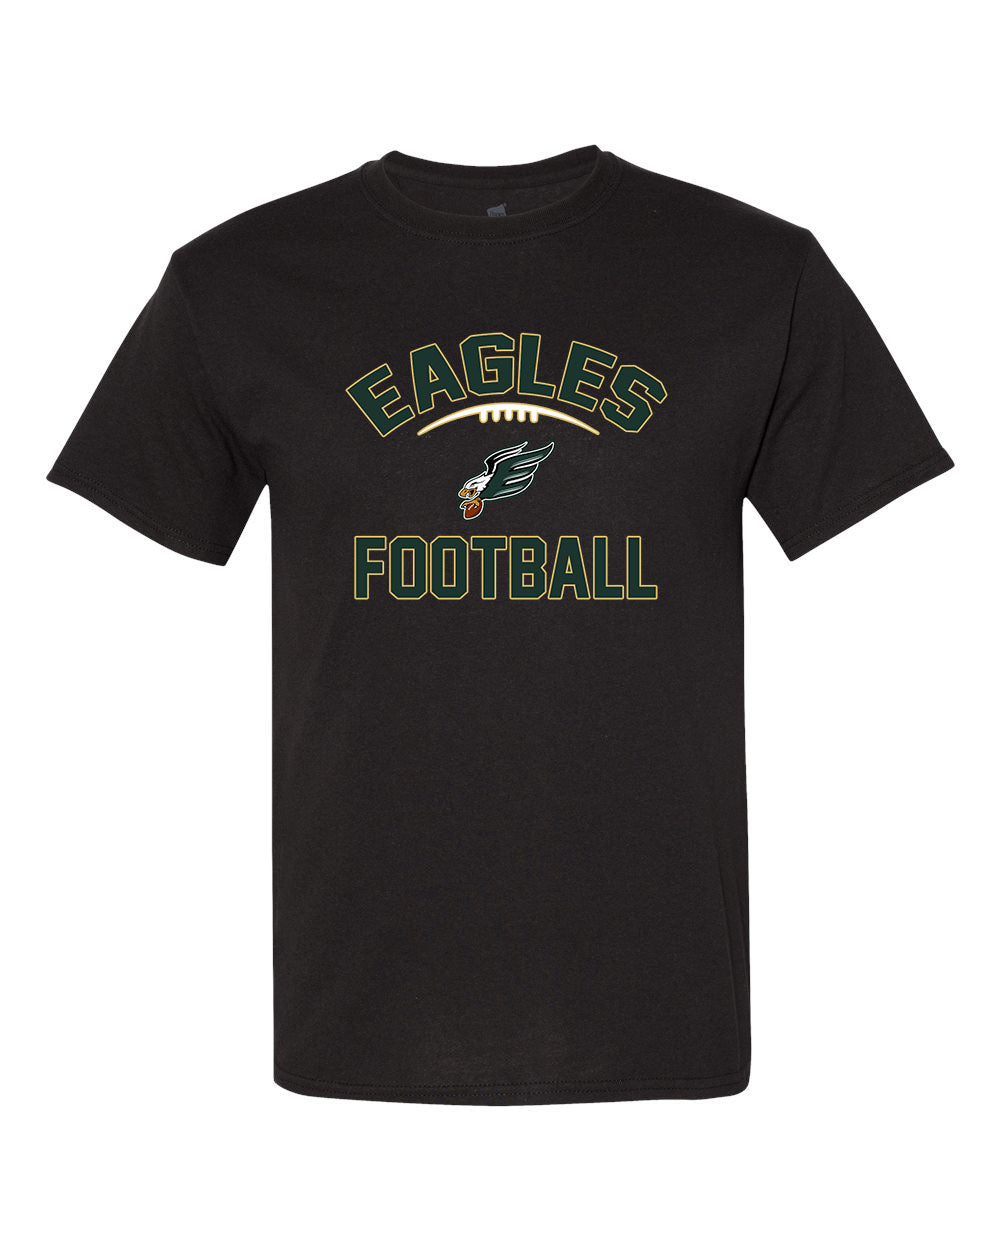 Enfield Eagles Football Adult T-Shirt 50/50 Blend "Classic" - 29MR (color options available)